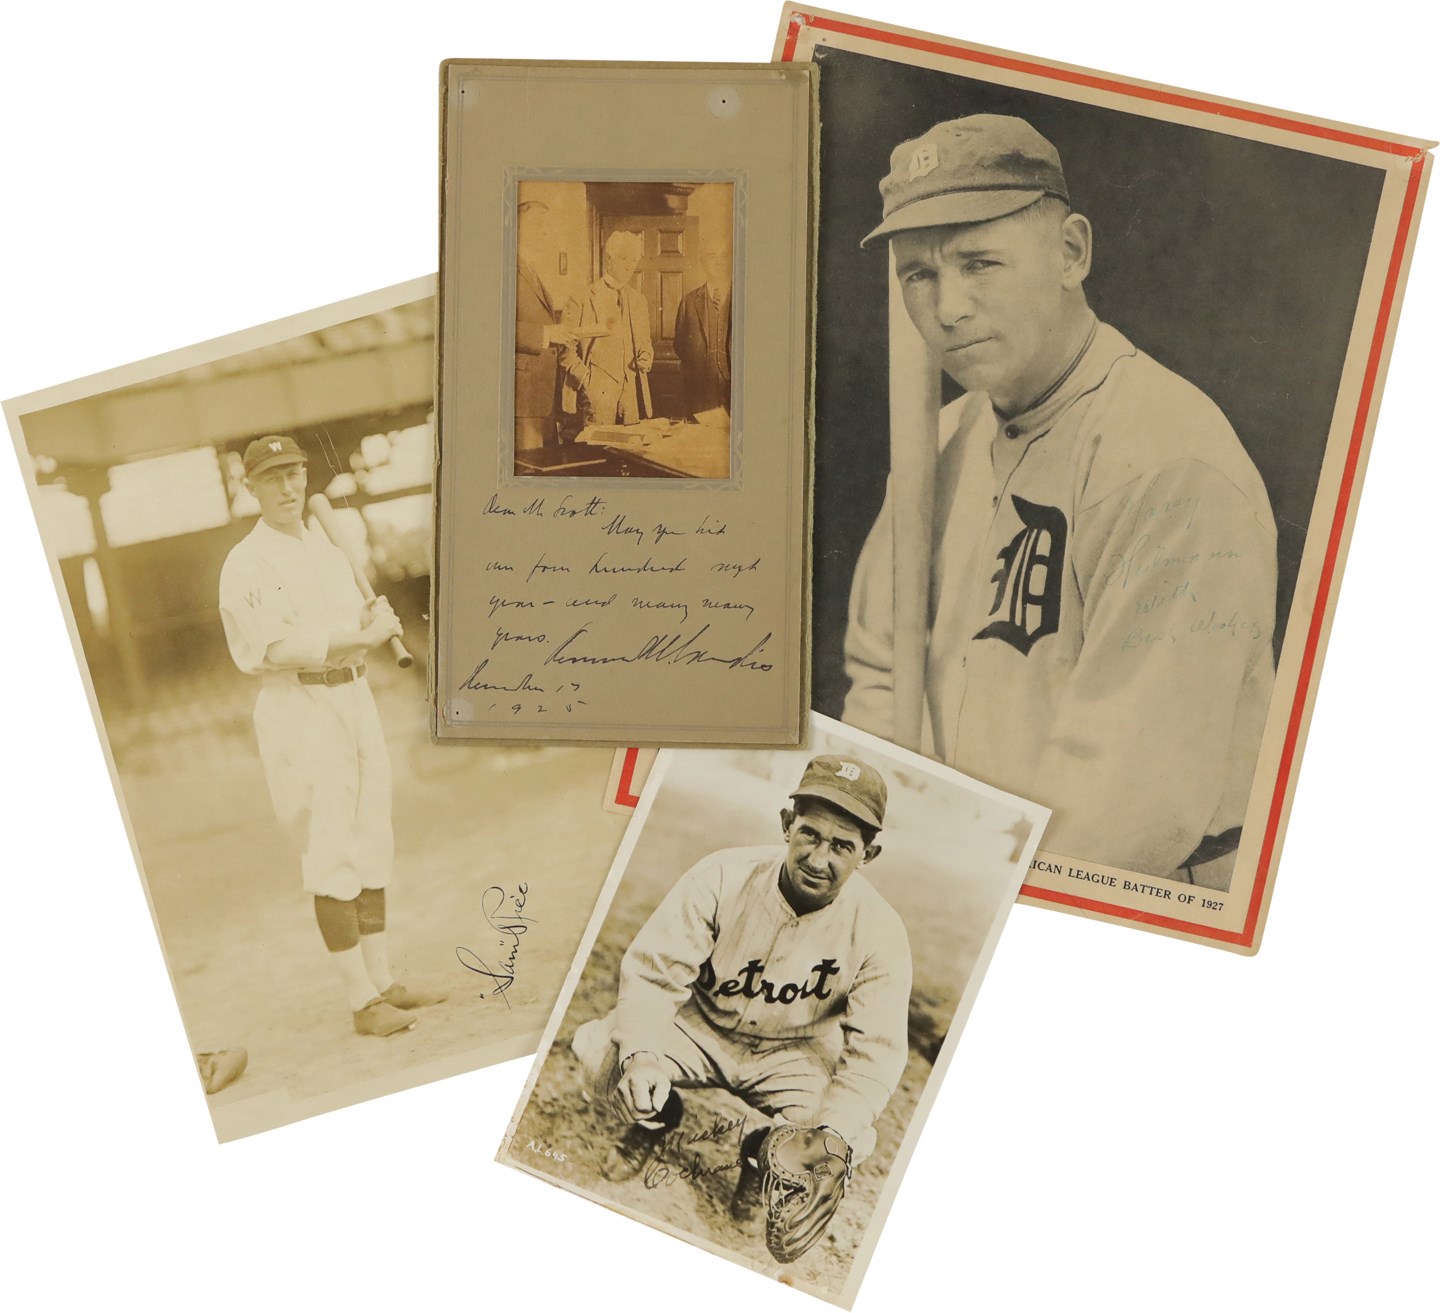 Baseball Autographs - Vintage Hall of Fame Signed Photo Collection (8) with Heilmann, S. Rice, Maranville, and Cochrane